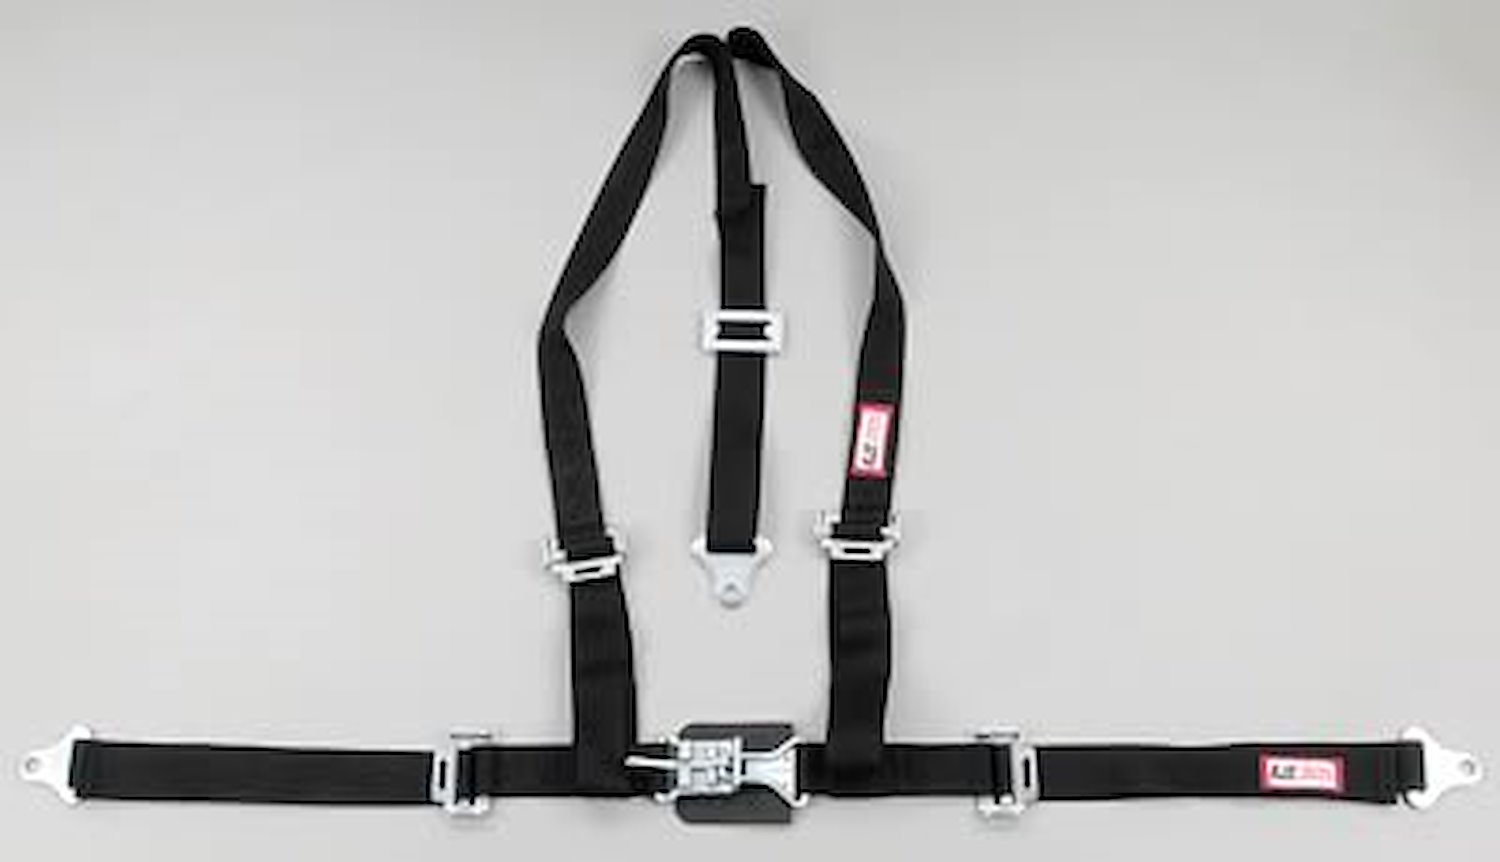 NON-SFI L&L HARNESS 3 PULL DOWN Lap Belt SNAP SEWN IN 2 S.H. Individual FLOOR Mount w/STERNUM STRAP WRAP/SNAP BLACK